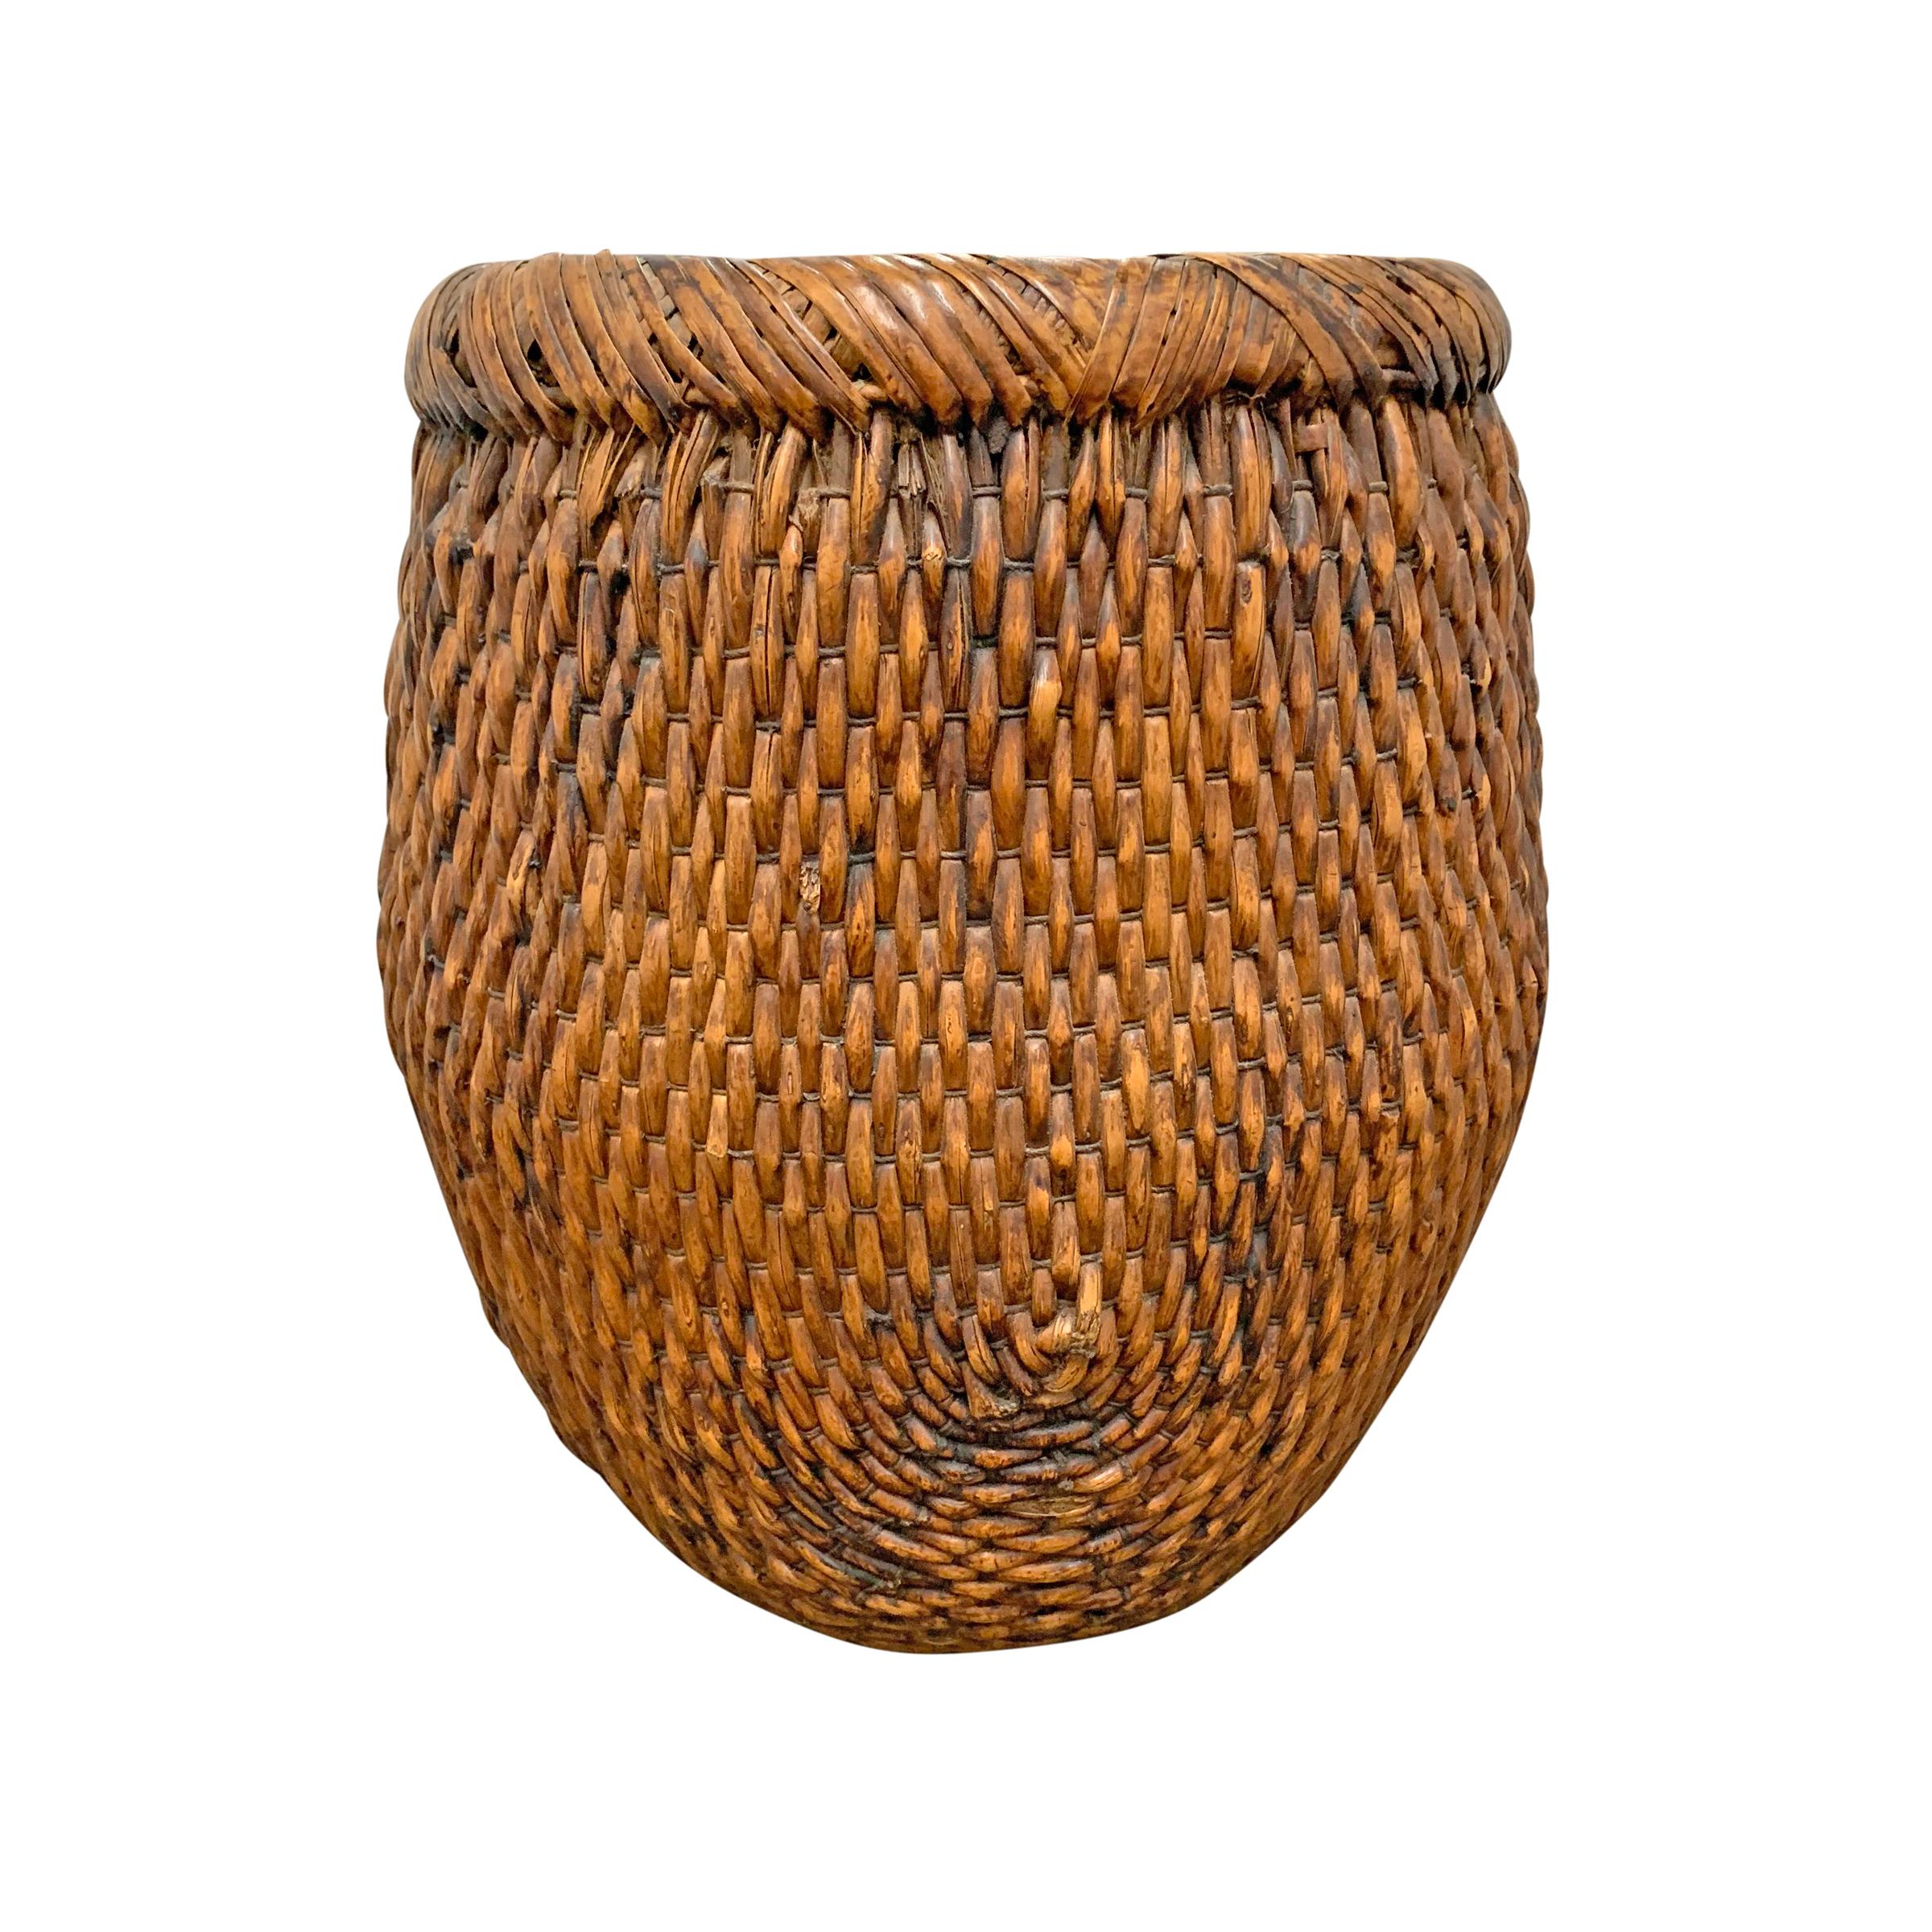 A mid-20th century Chinese woven reed basket with a rolled banded top wrapped in flat reeds.